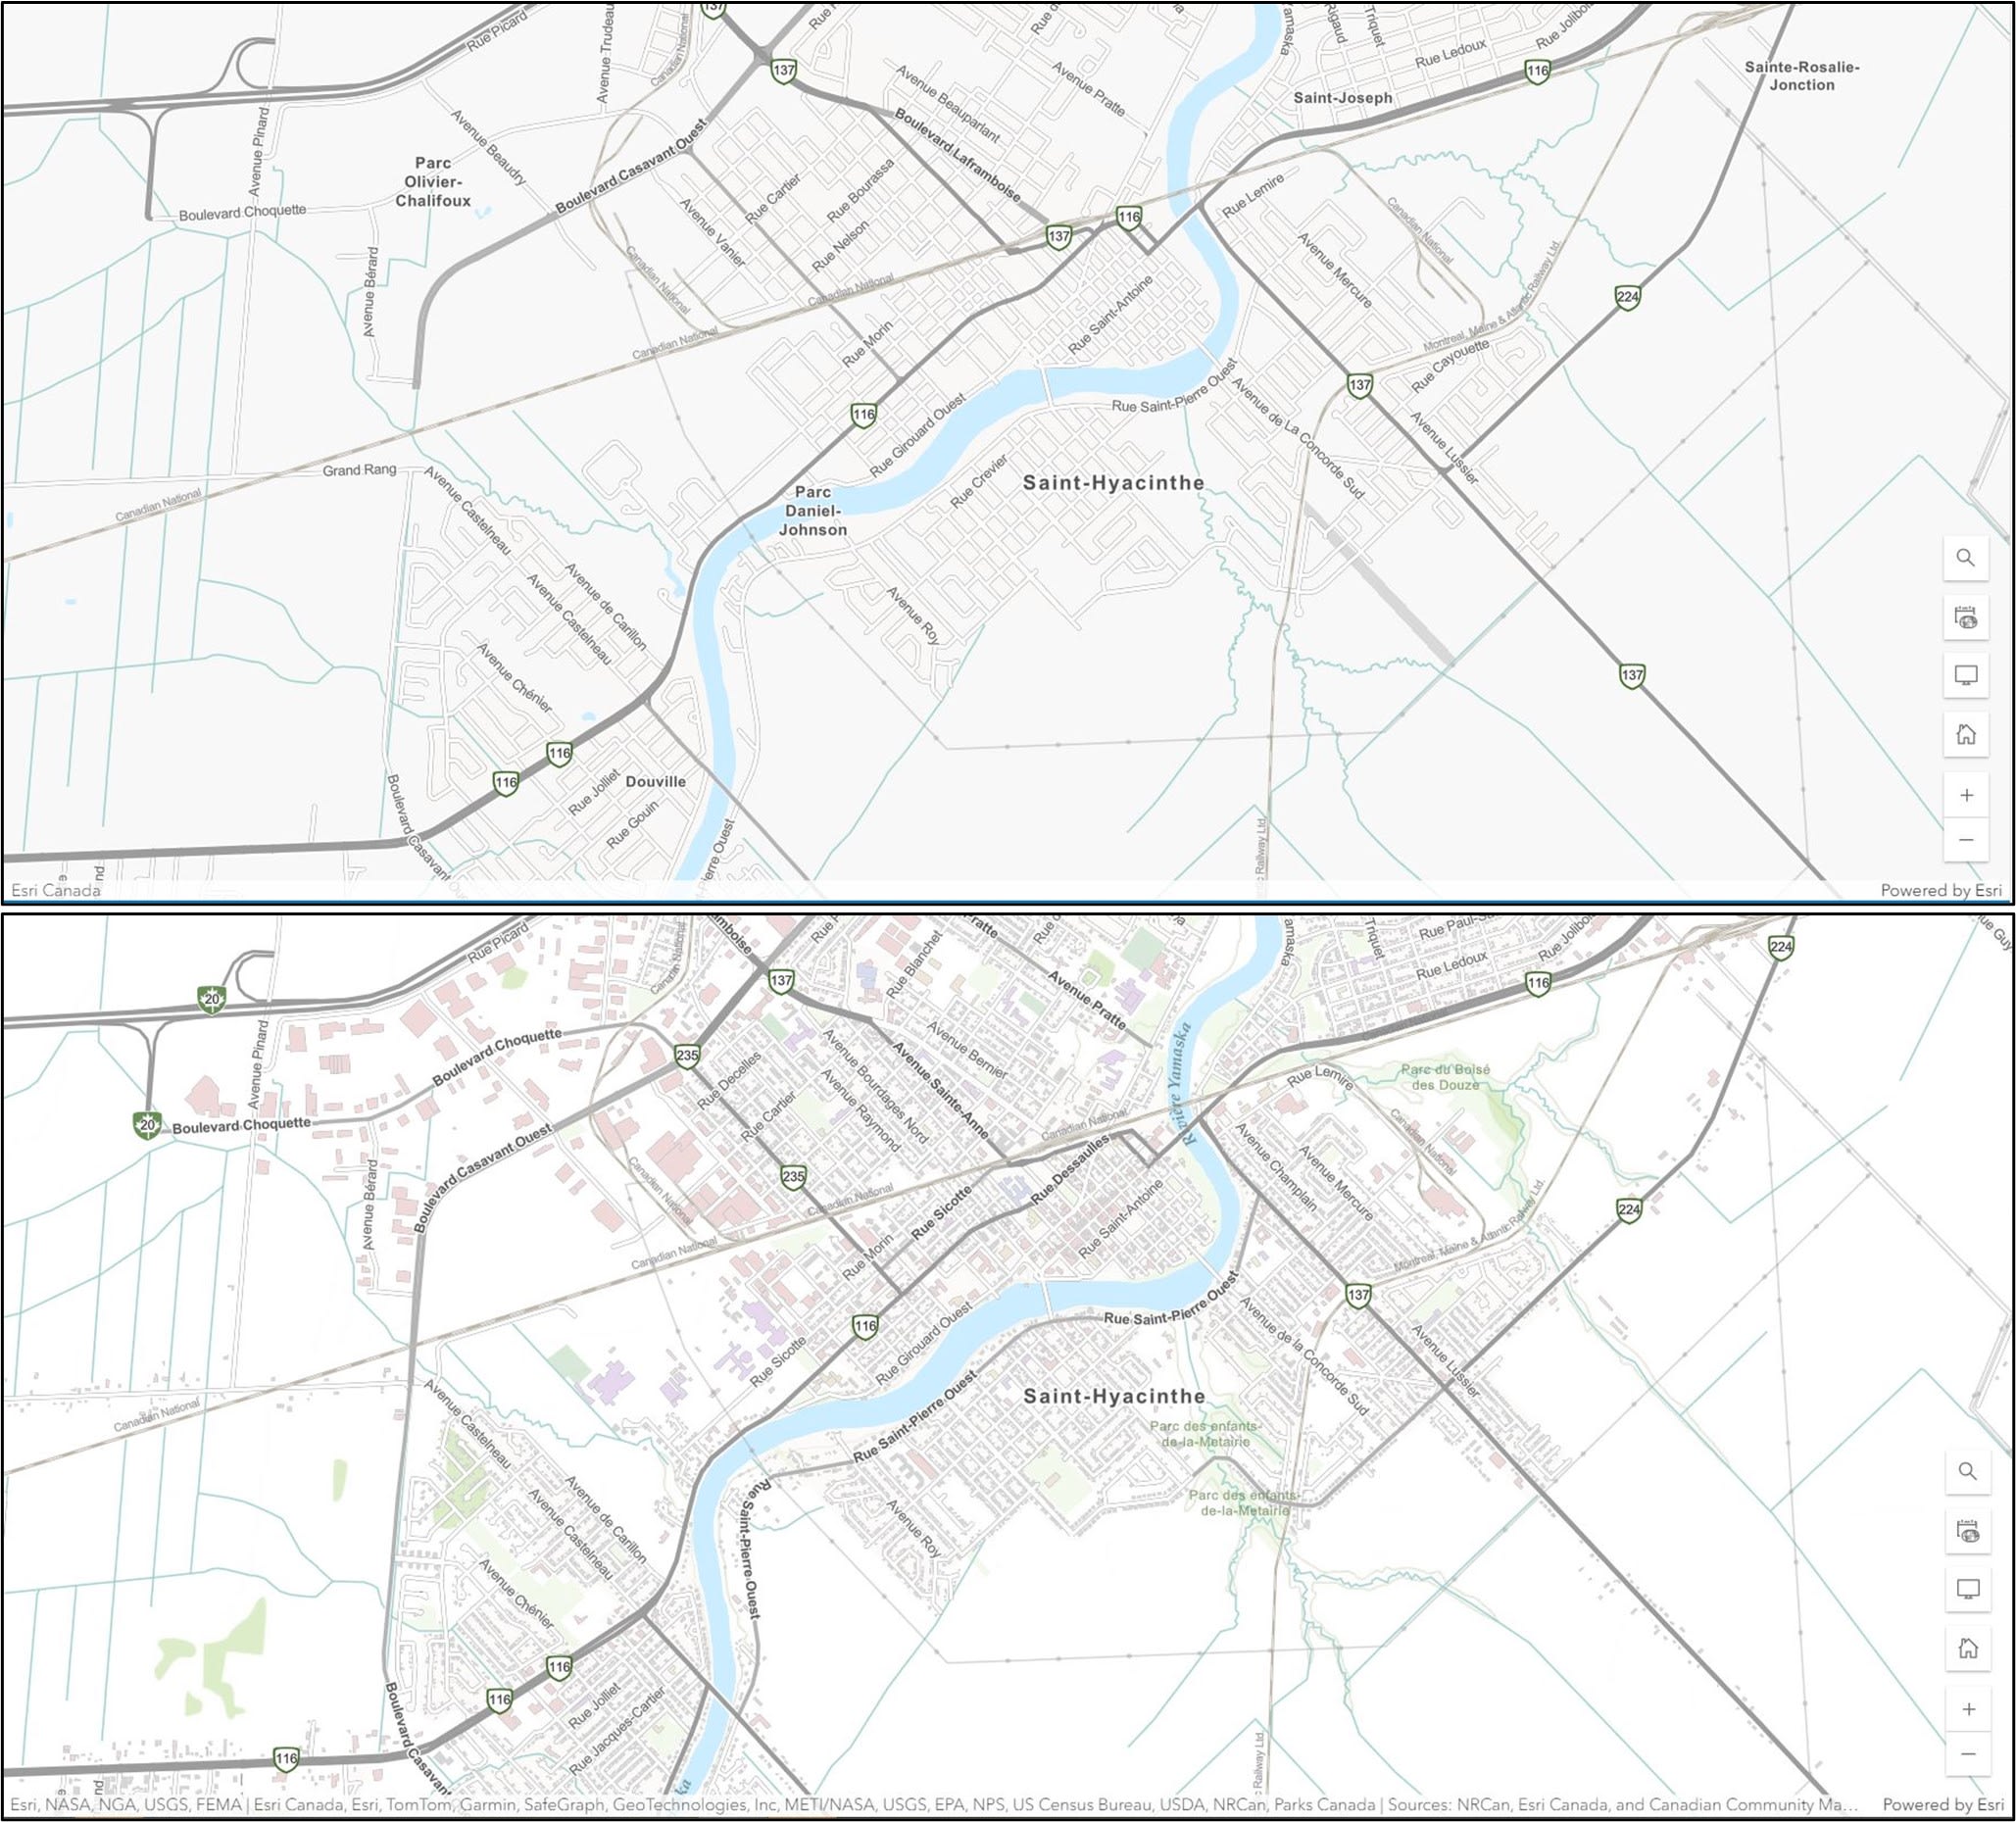 Comparison images of two topographic maps at the same place (the city of Saint-Hyacinthe, Québec, comparing the map before and after it was filled in with data. The top image shows the map emptier than the bottom image, which is more filled in with building footprints and parks data. 